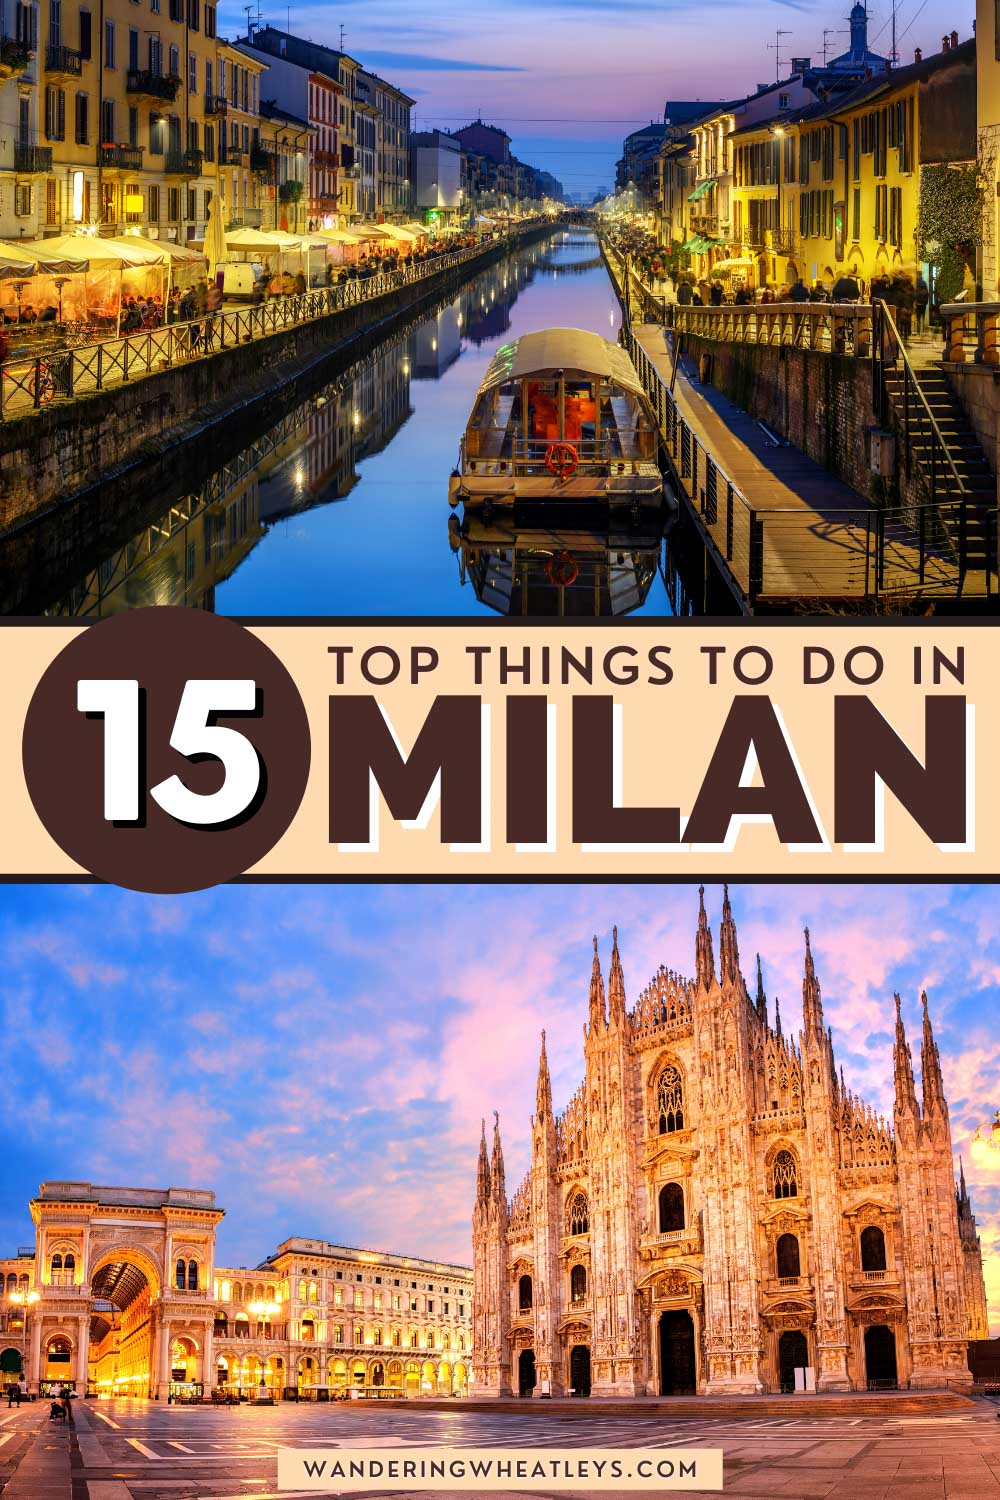 The Best Things to do in Milan, Italy